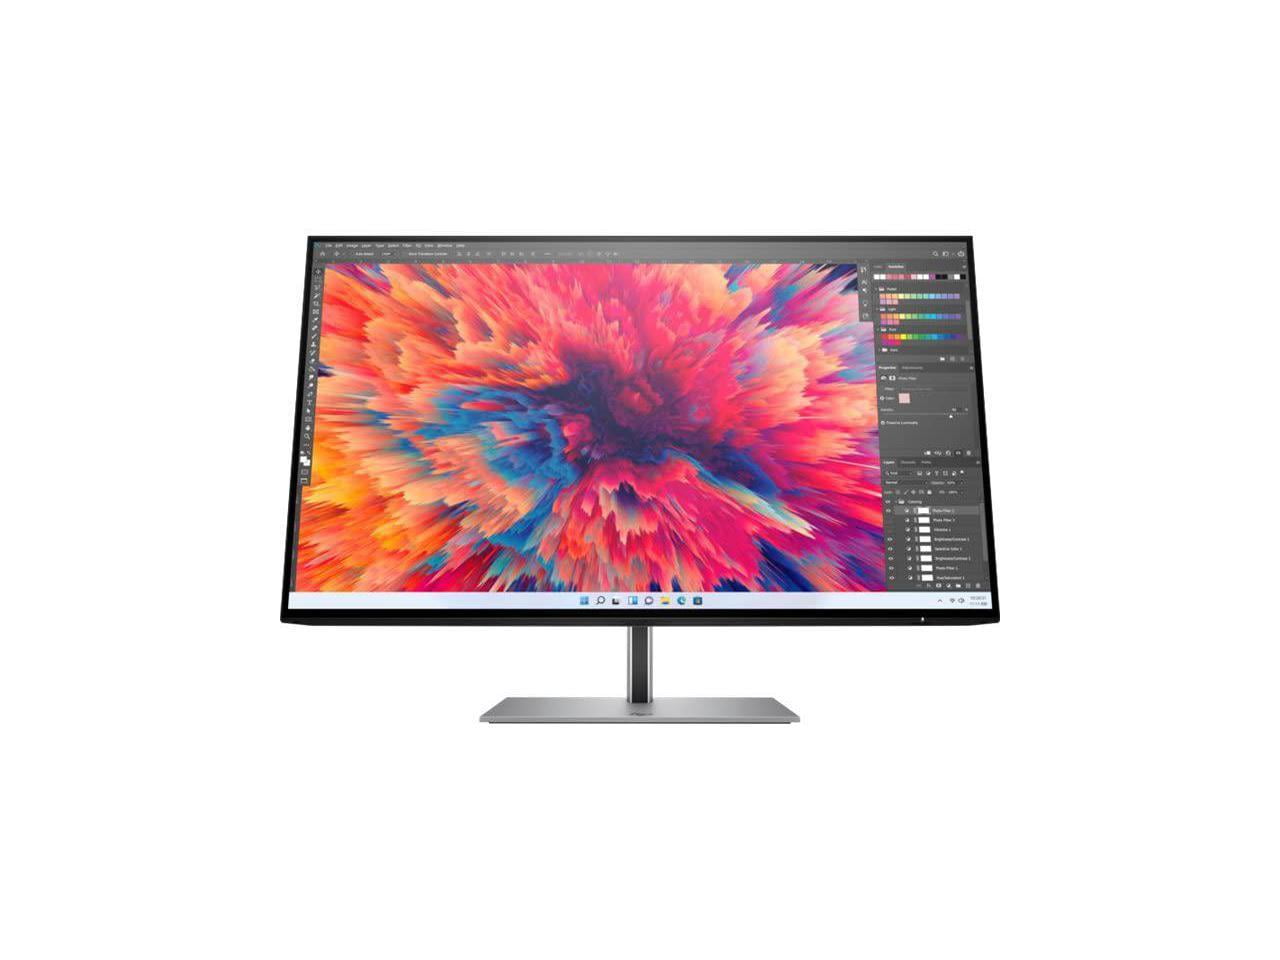 Prime enable regional HP 24" (23.8" Viewable) 60 Hz IPS QHD Monitor 5 ms GtG (with overdrive)  2560 x 1440 (2K) Flat Panel Z24q G3 - Walmart.com